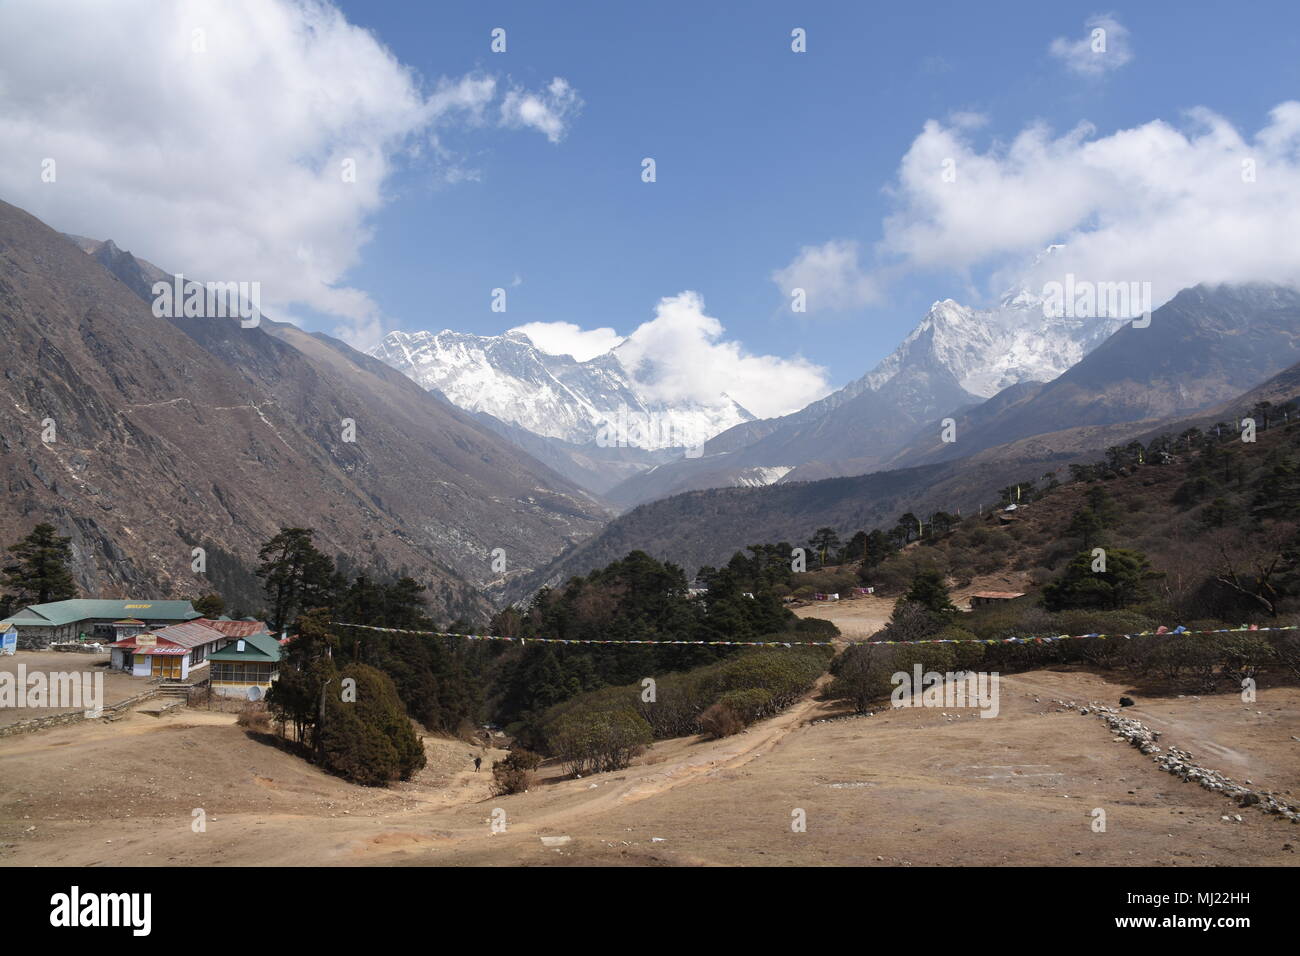 View of Everest, Lhotse, and Ama Dablam from Tengboche, Nepal Stock Photo